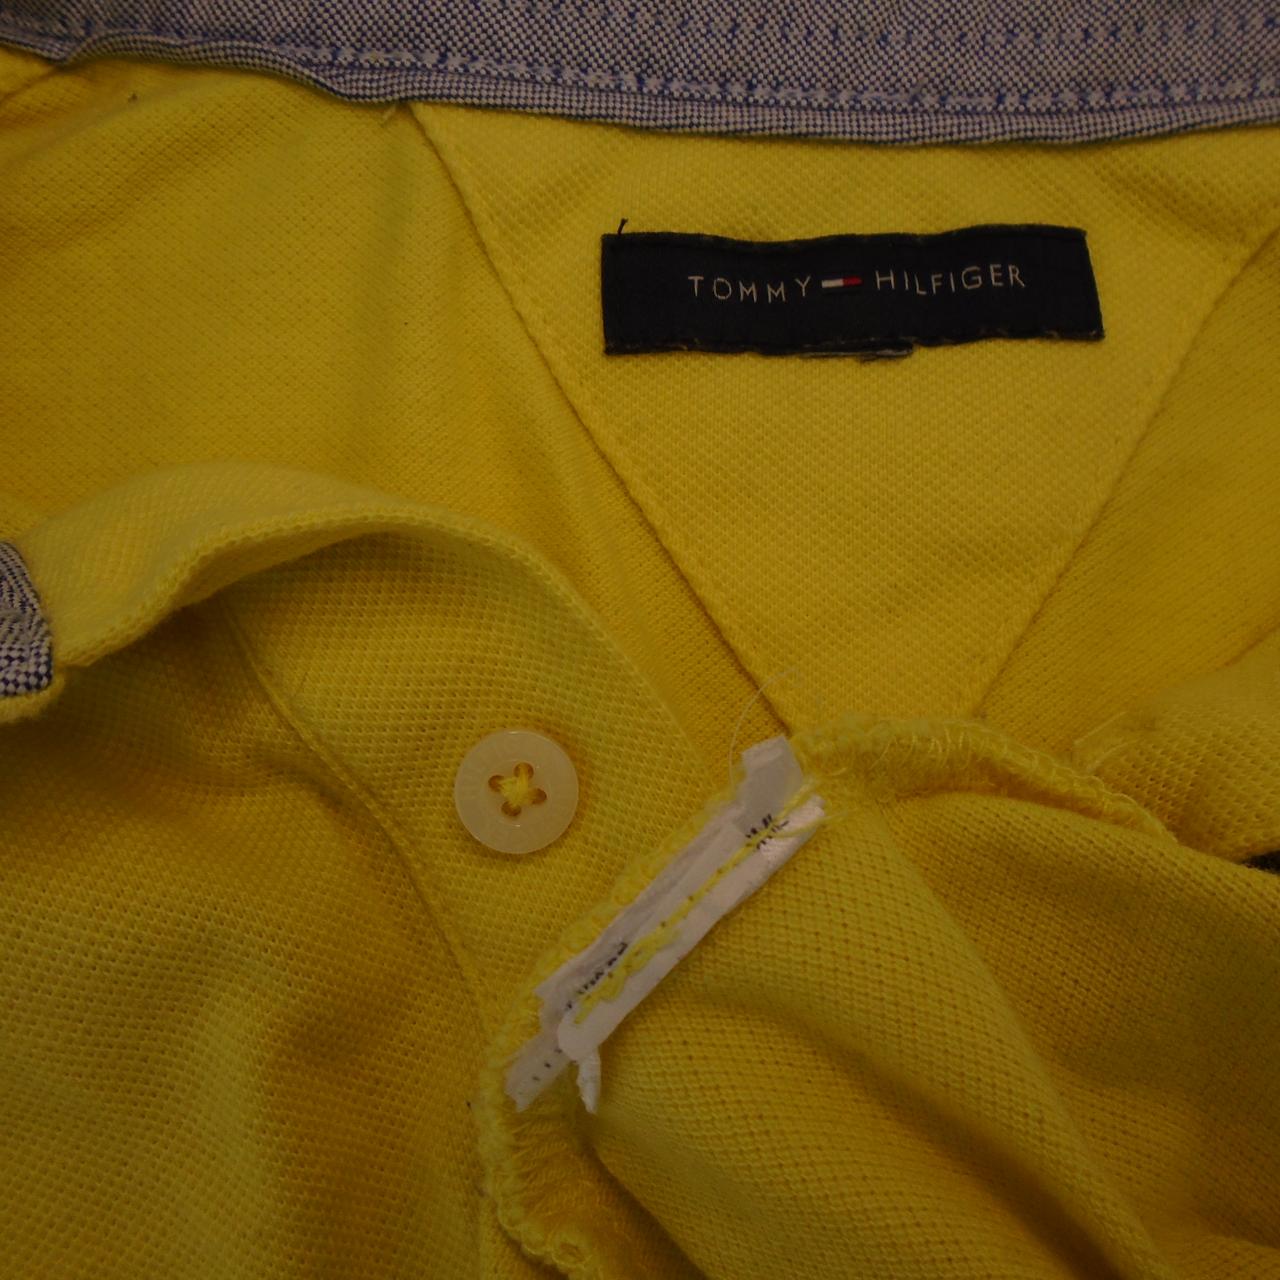 Women's Polo Tommy Hilfiger. Yellow. M. Used. Good